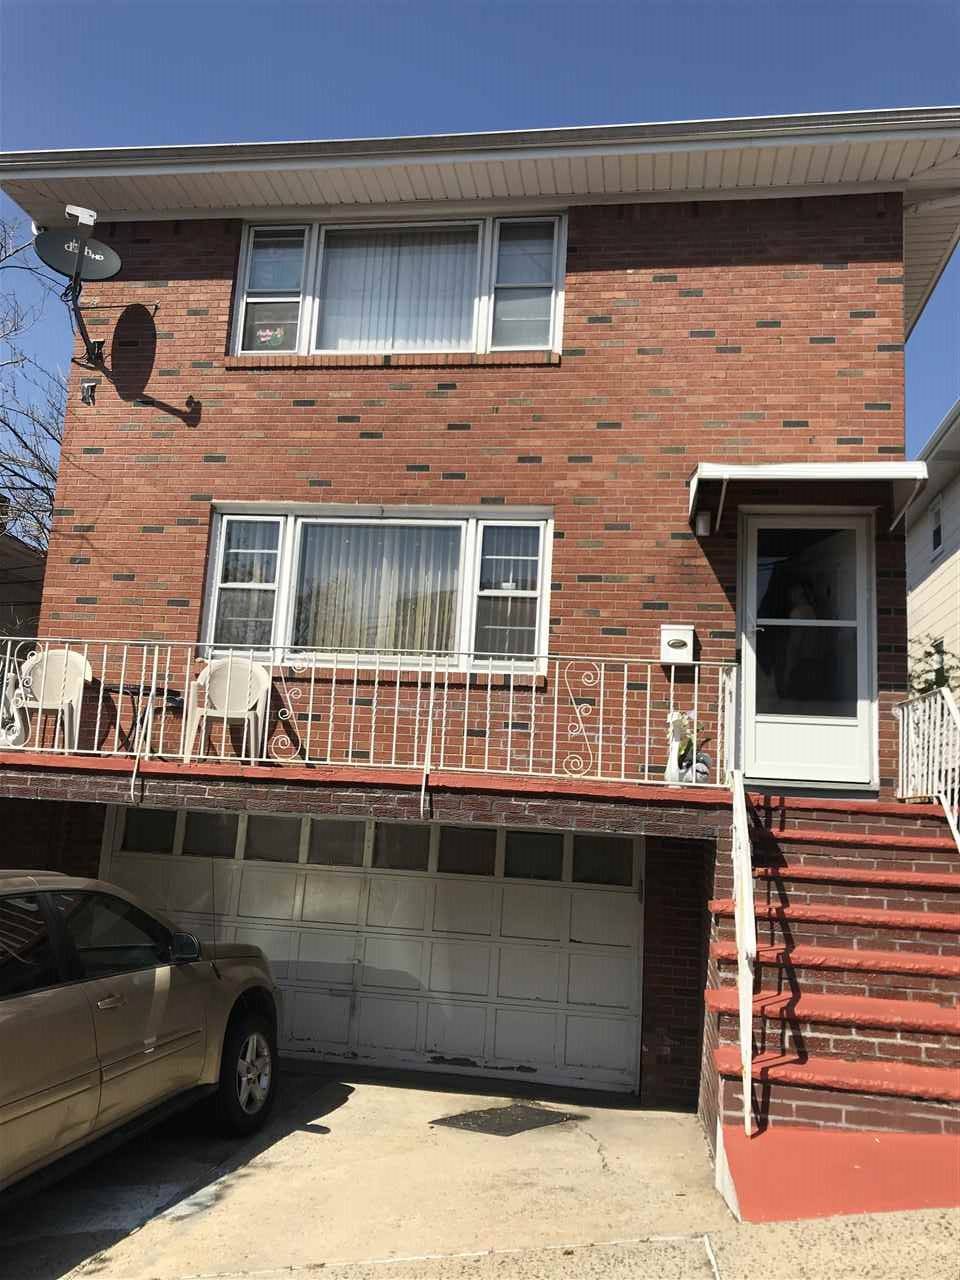 This is a 3 bed - 3 BR New Jersey